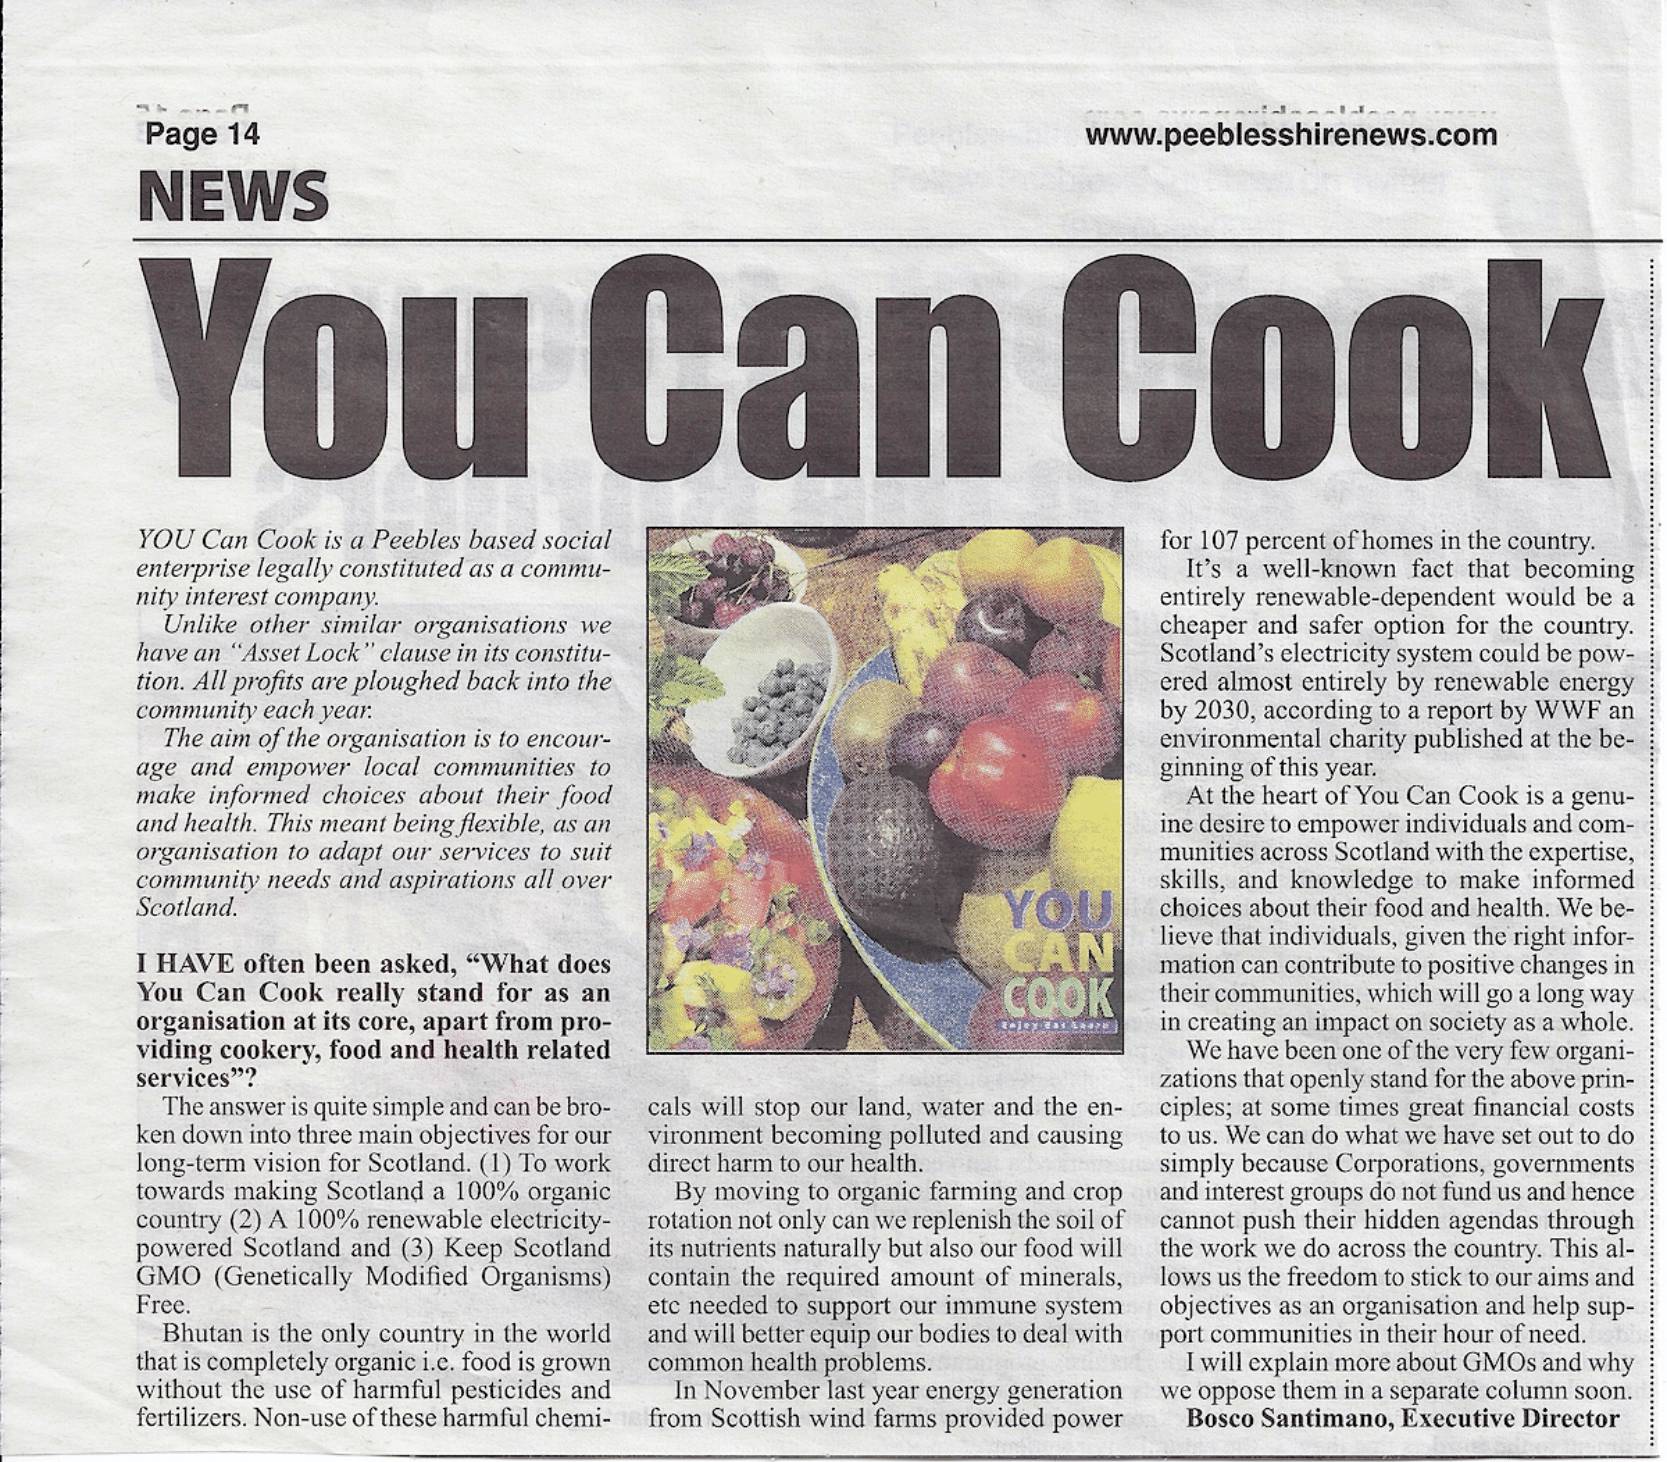 Press Clipping: You Can Cook